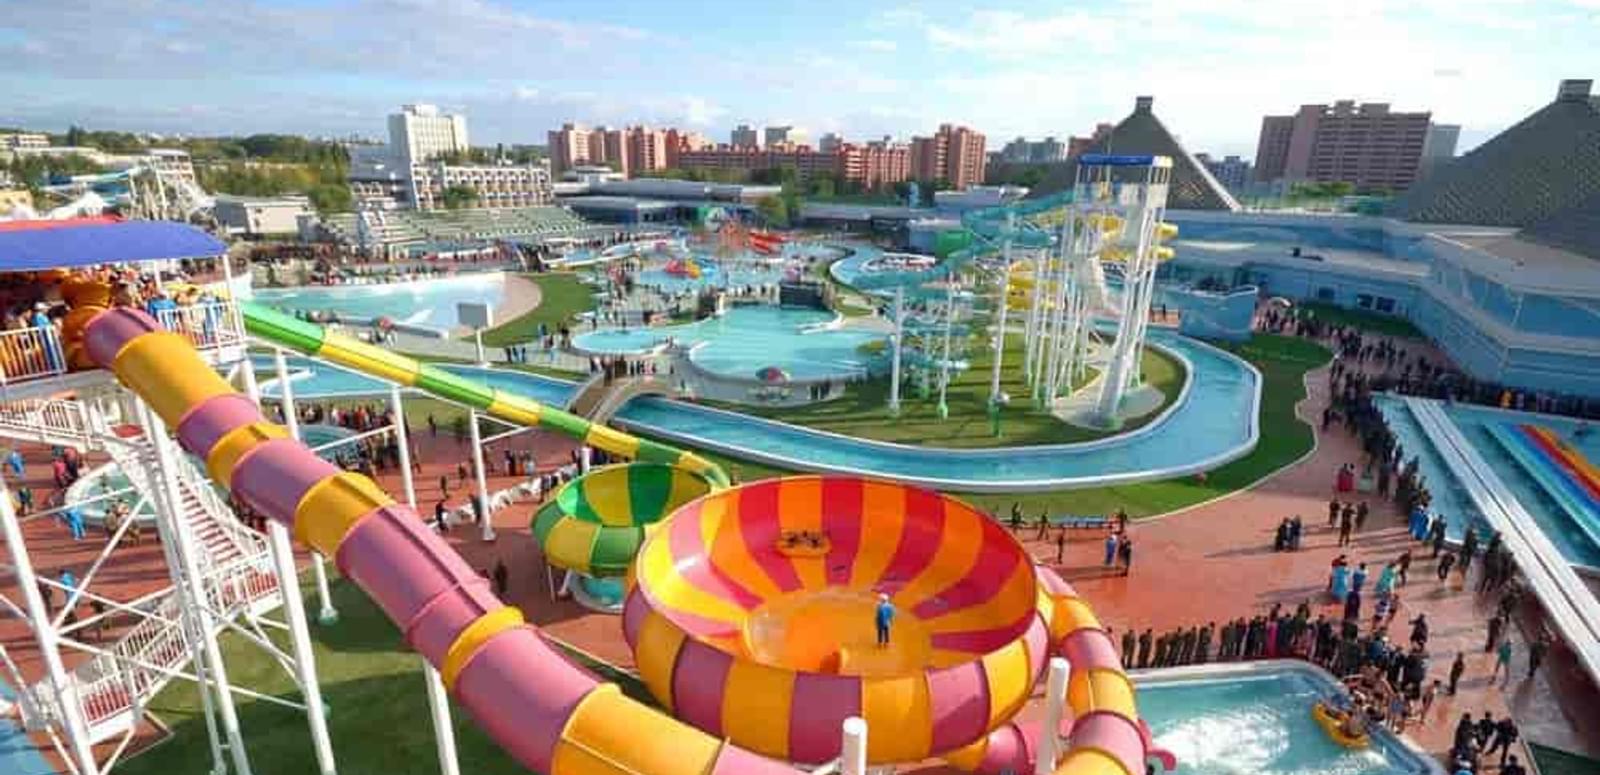 Blue Whale Water Park Goa | Book Online @ ₹250 & Save 23%